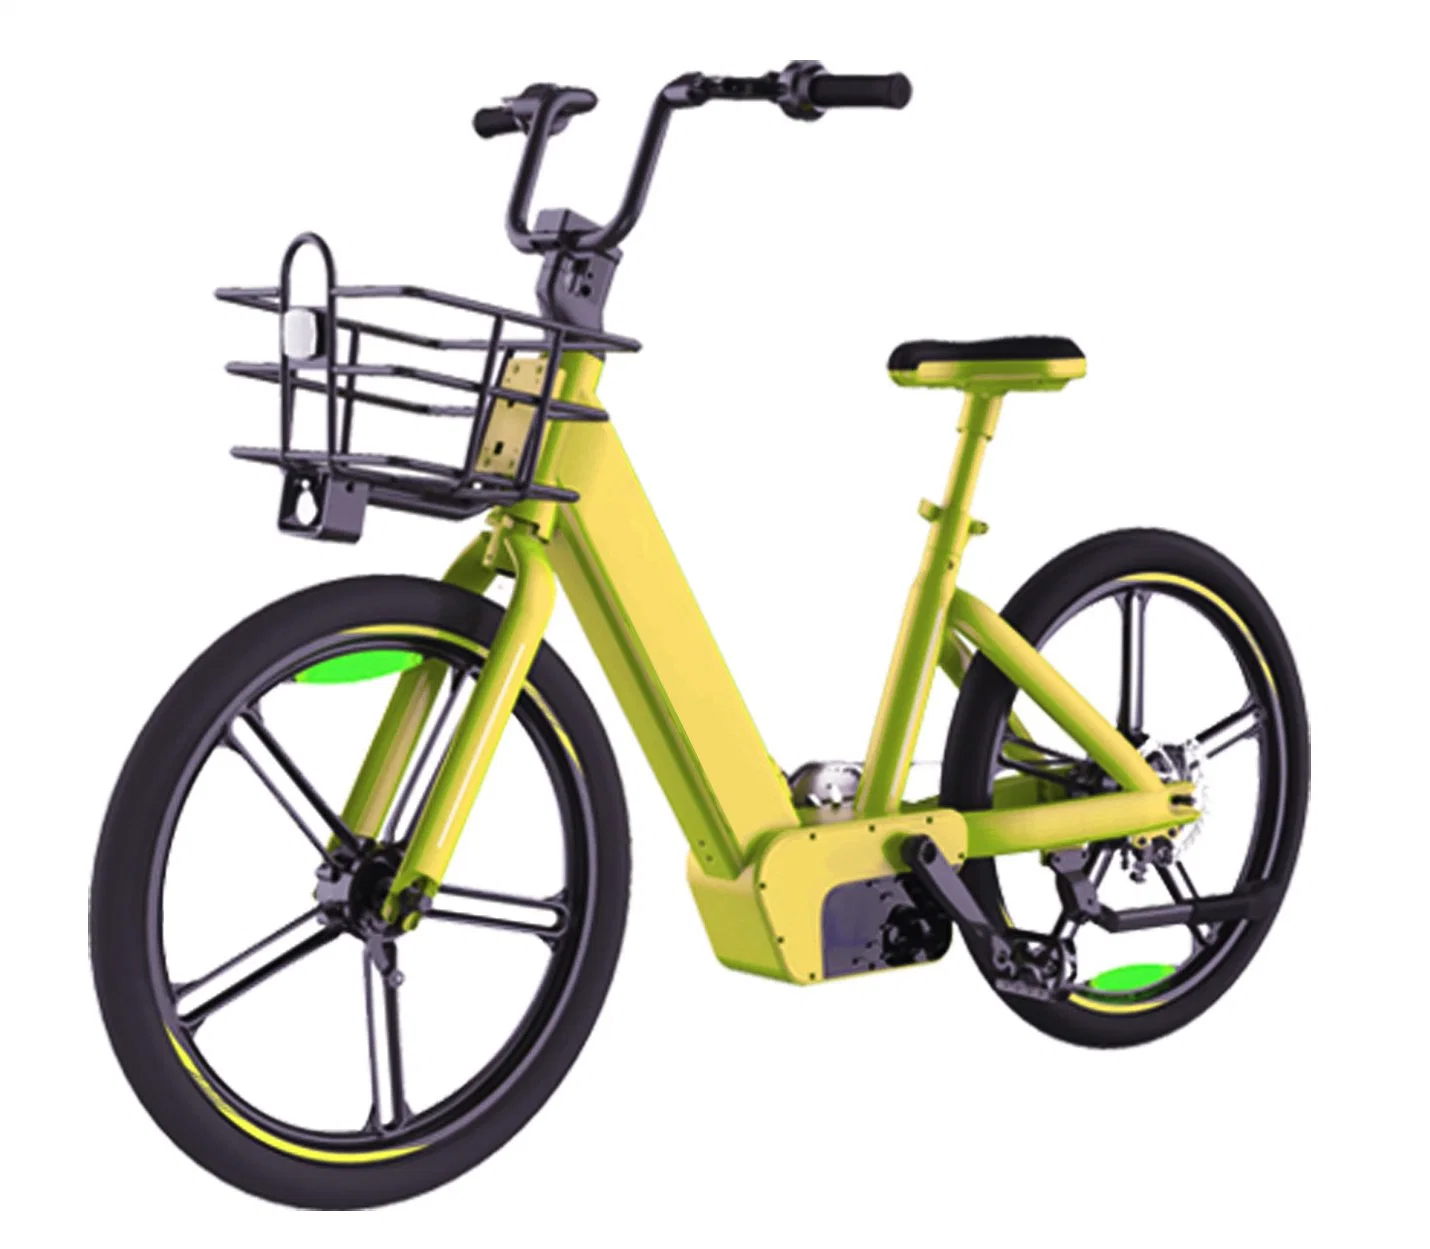 Fashion Hydrogen Bike Hydrogen Fuel Cell Bicycle with Good Quanlity